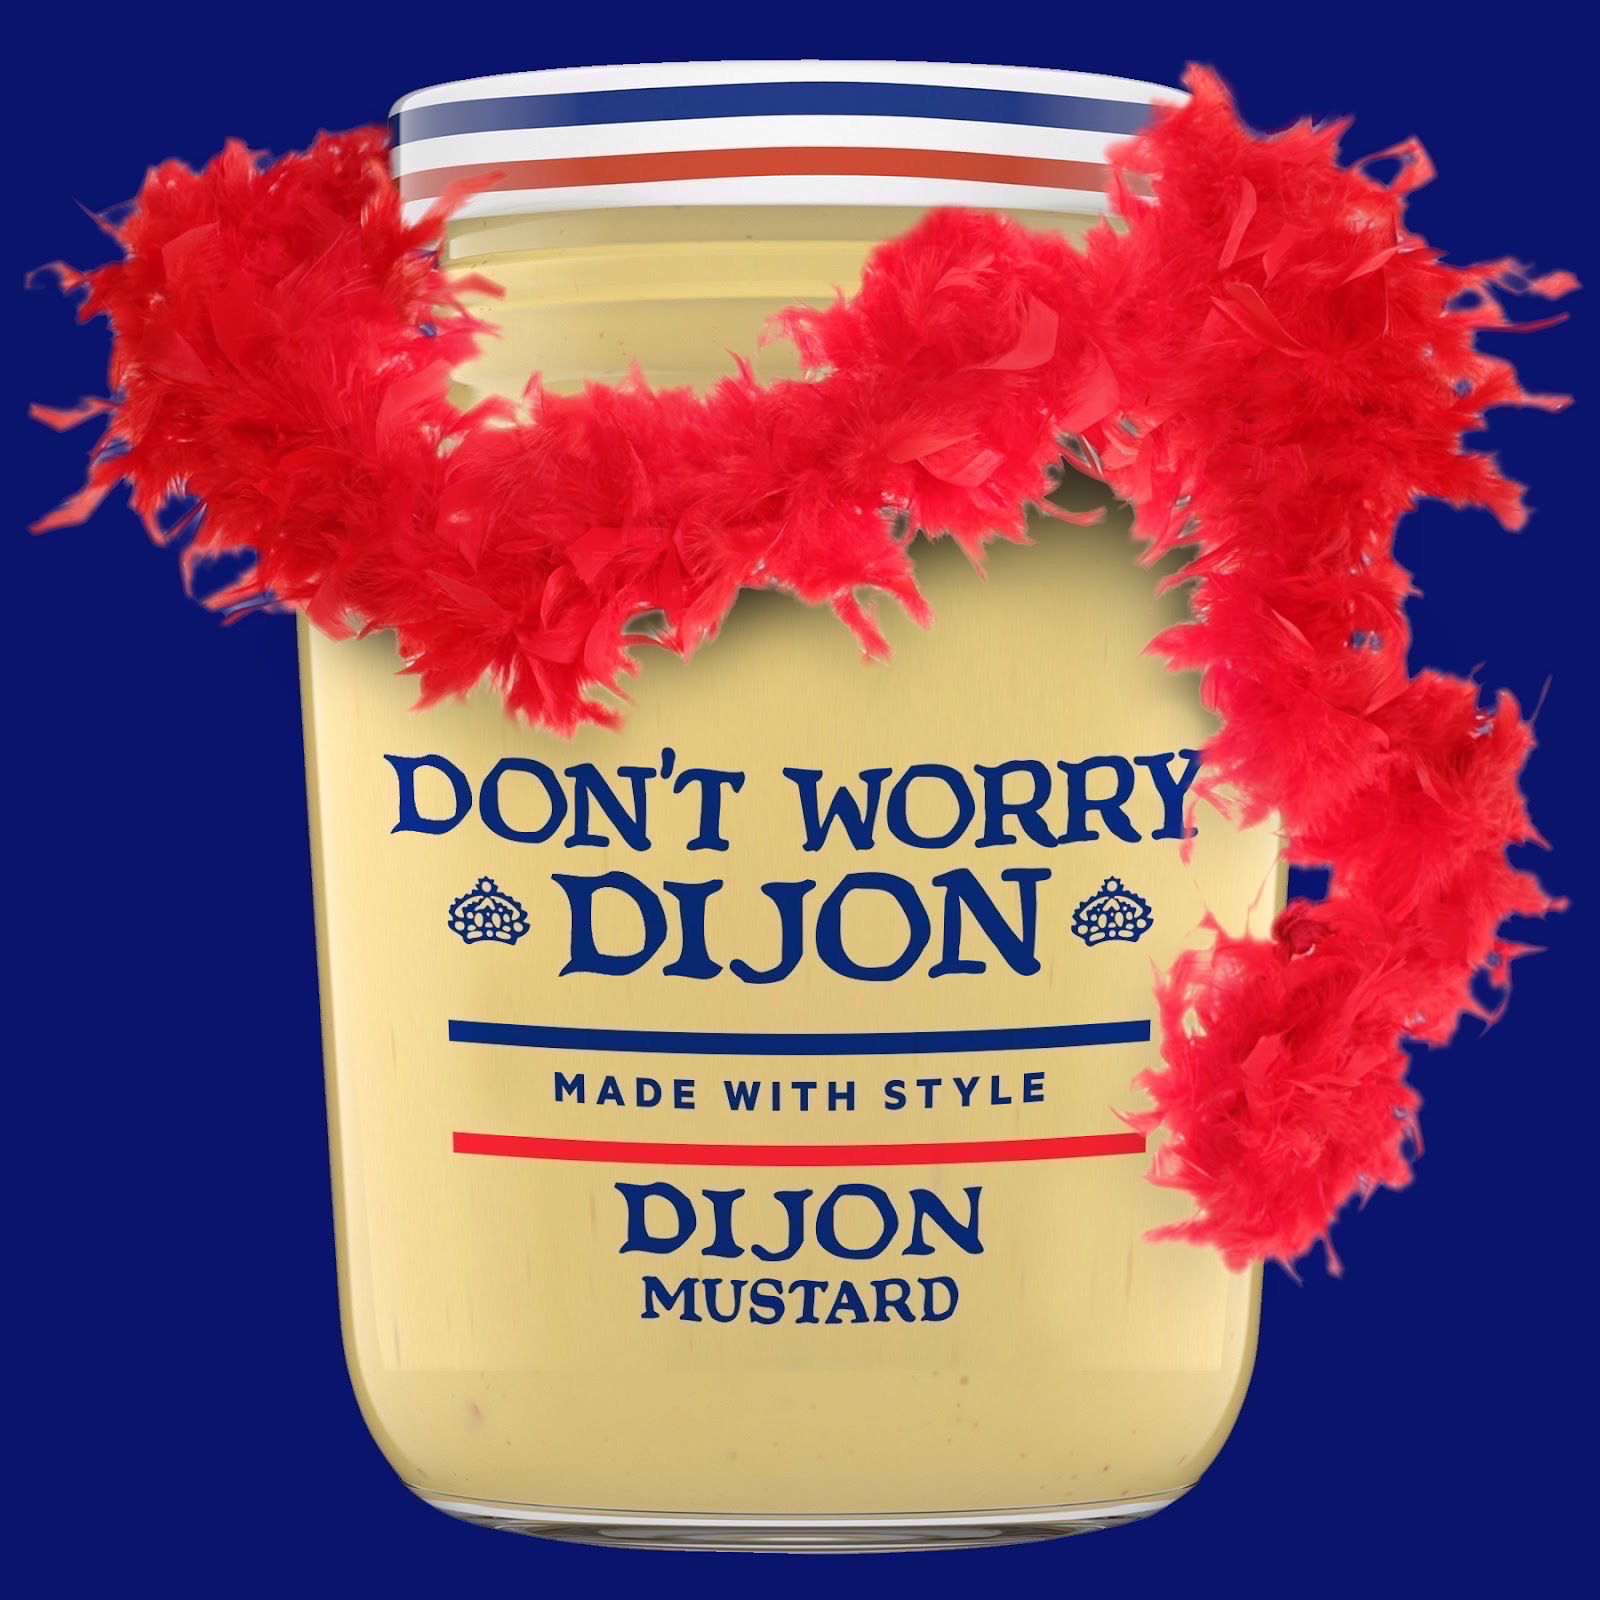 Grey Poupon Releases ‘Don’t Worry Dijon’ Jars After Olivia Wilde Post – NBC Chicago